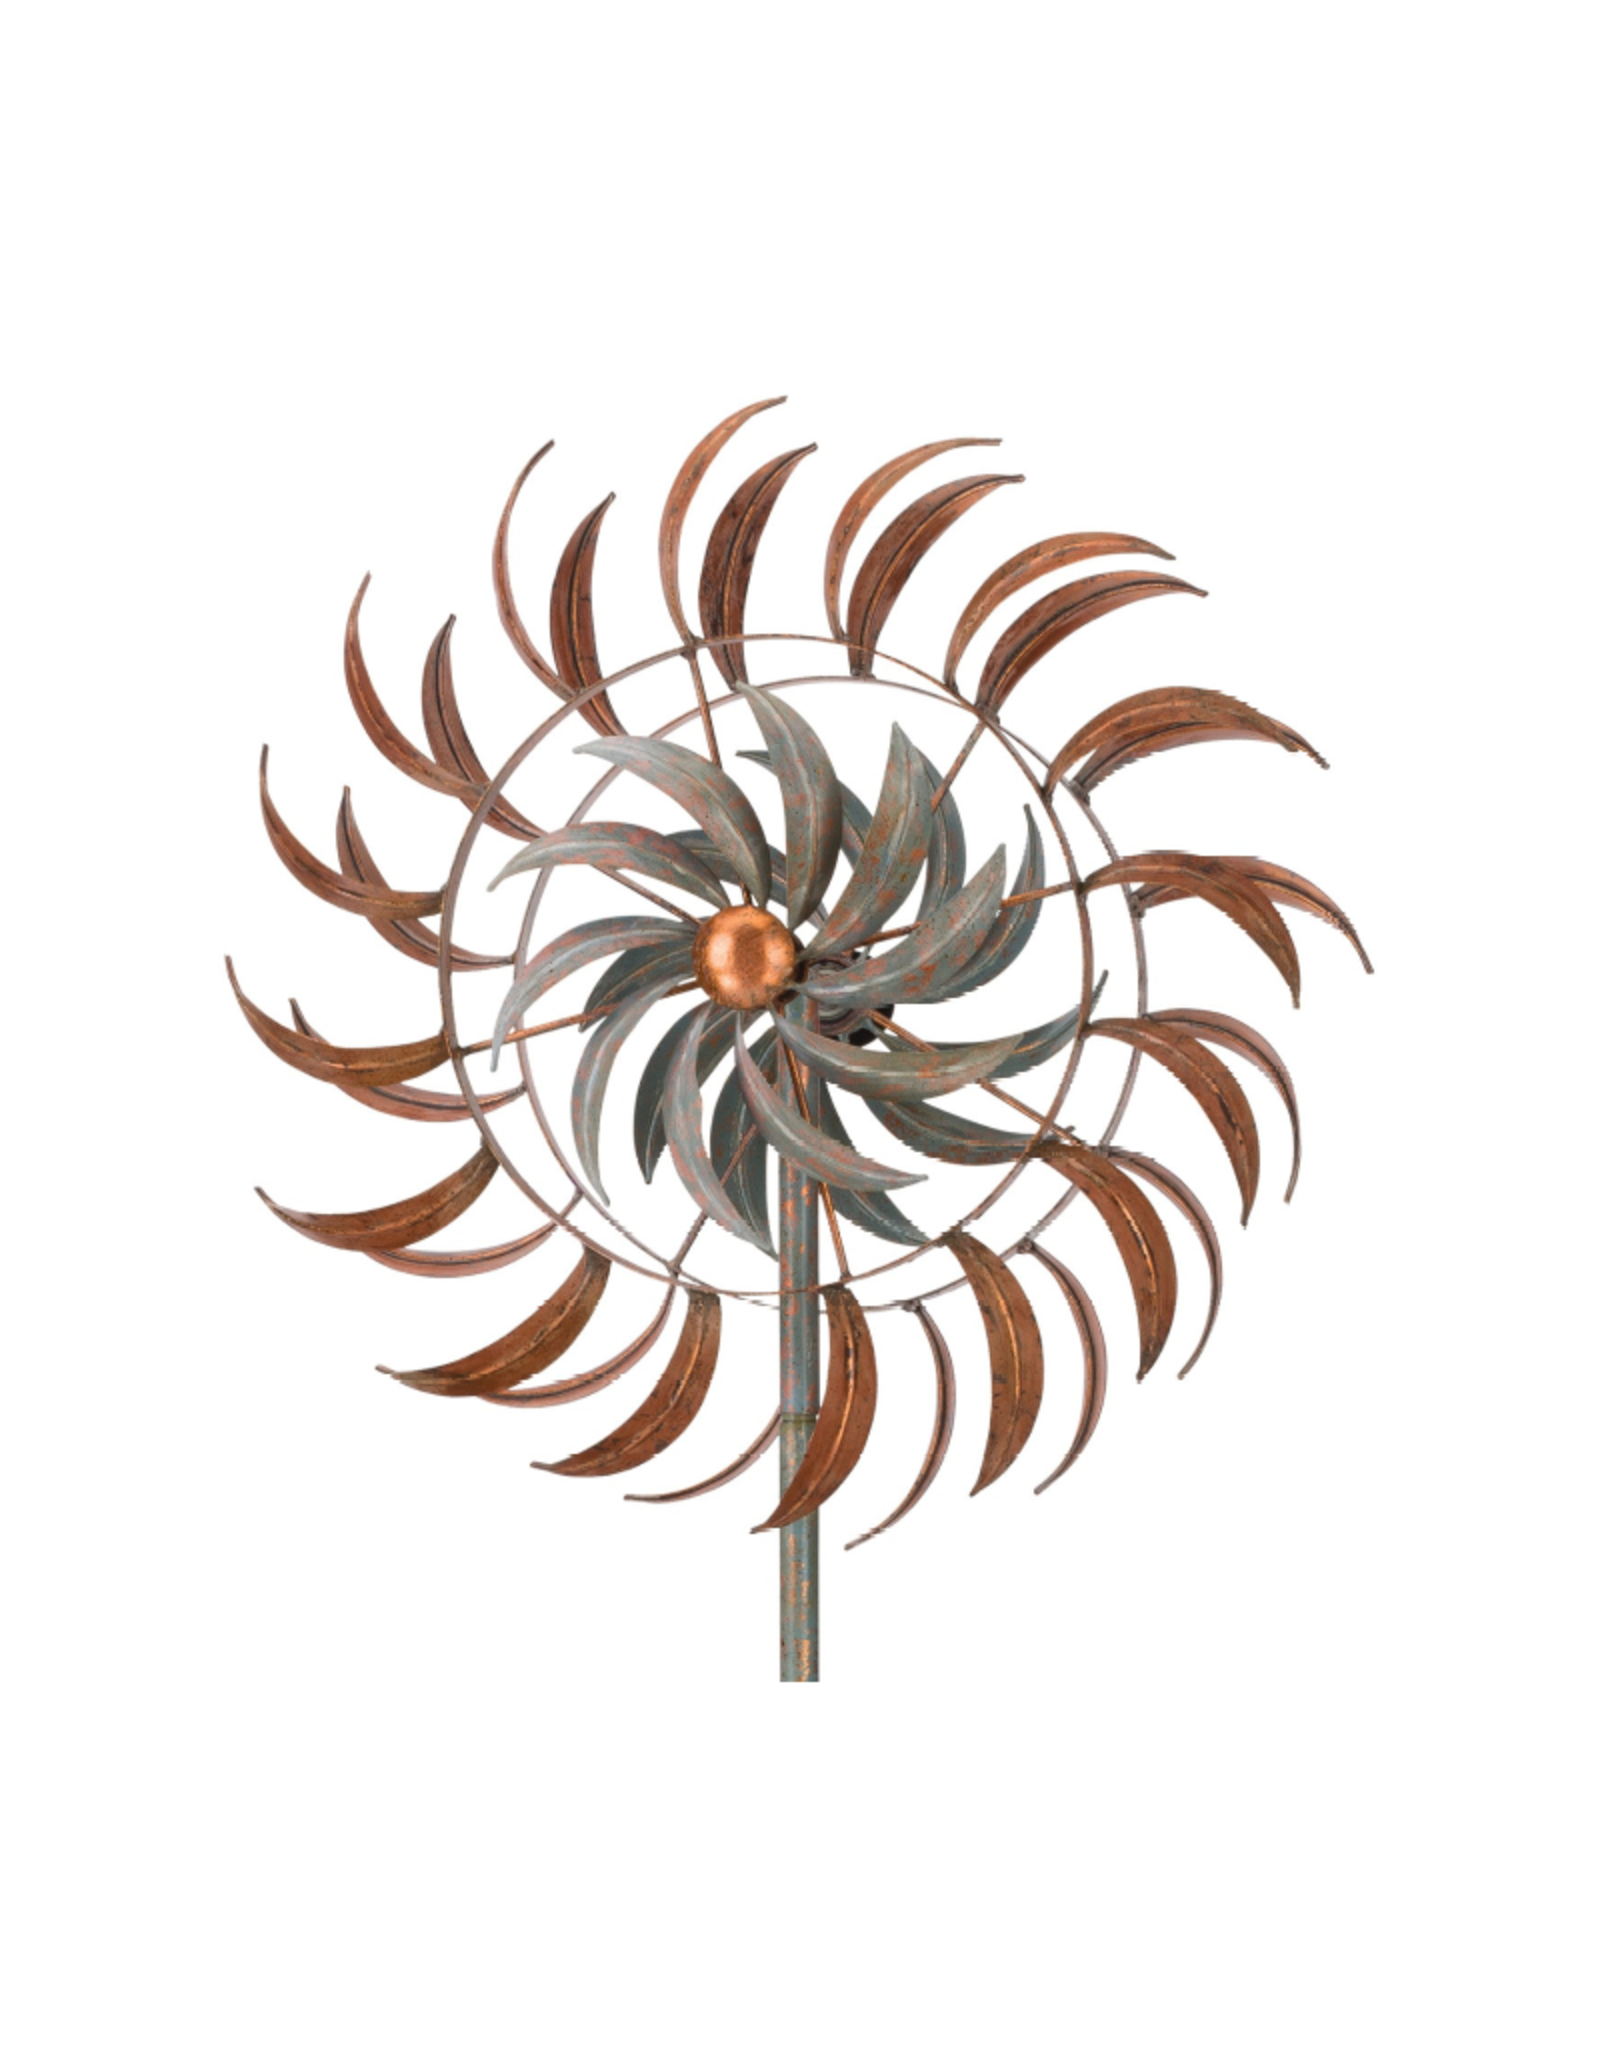 24'' Kinetic Stake - Copper Petals